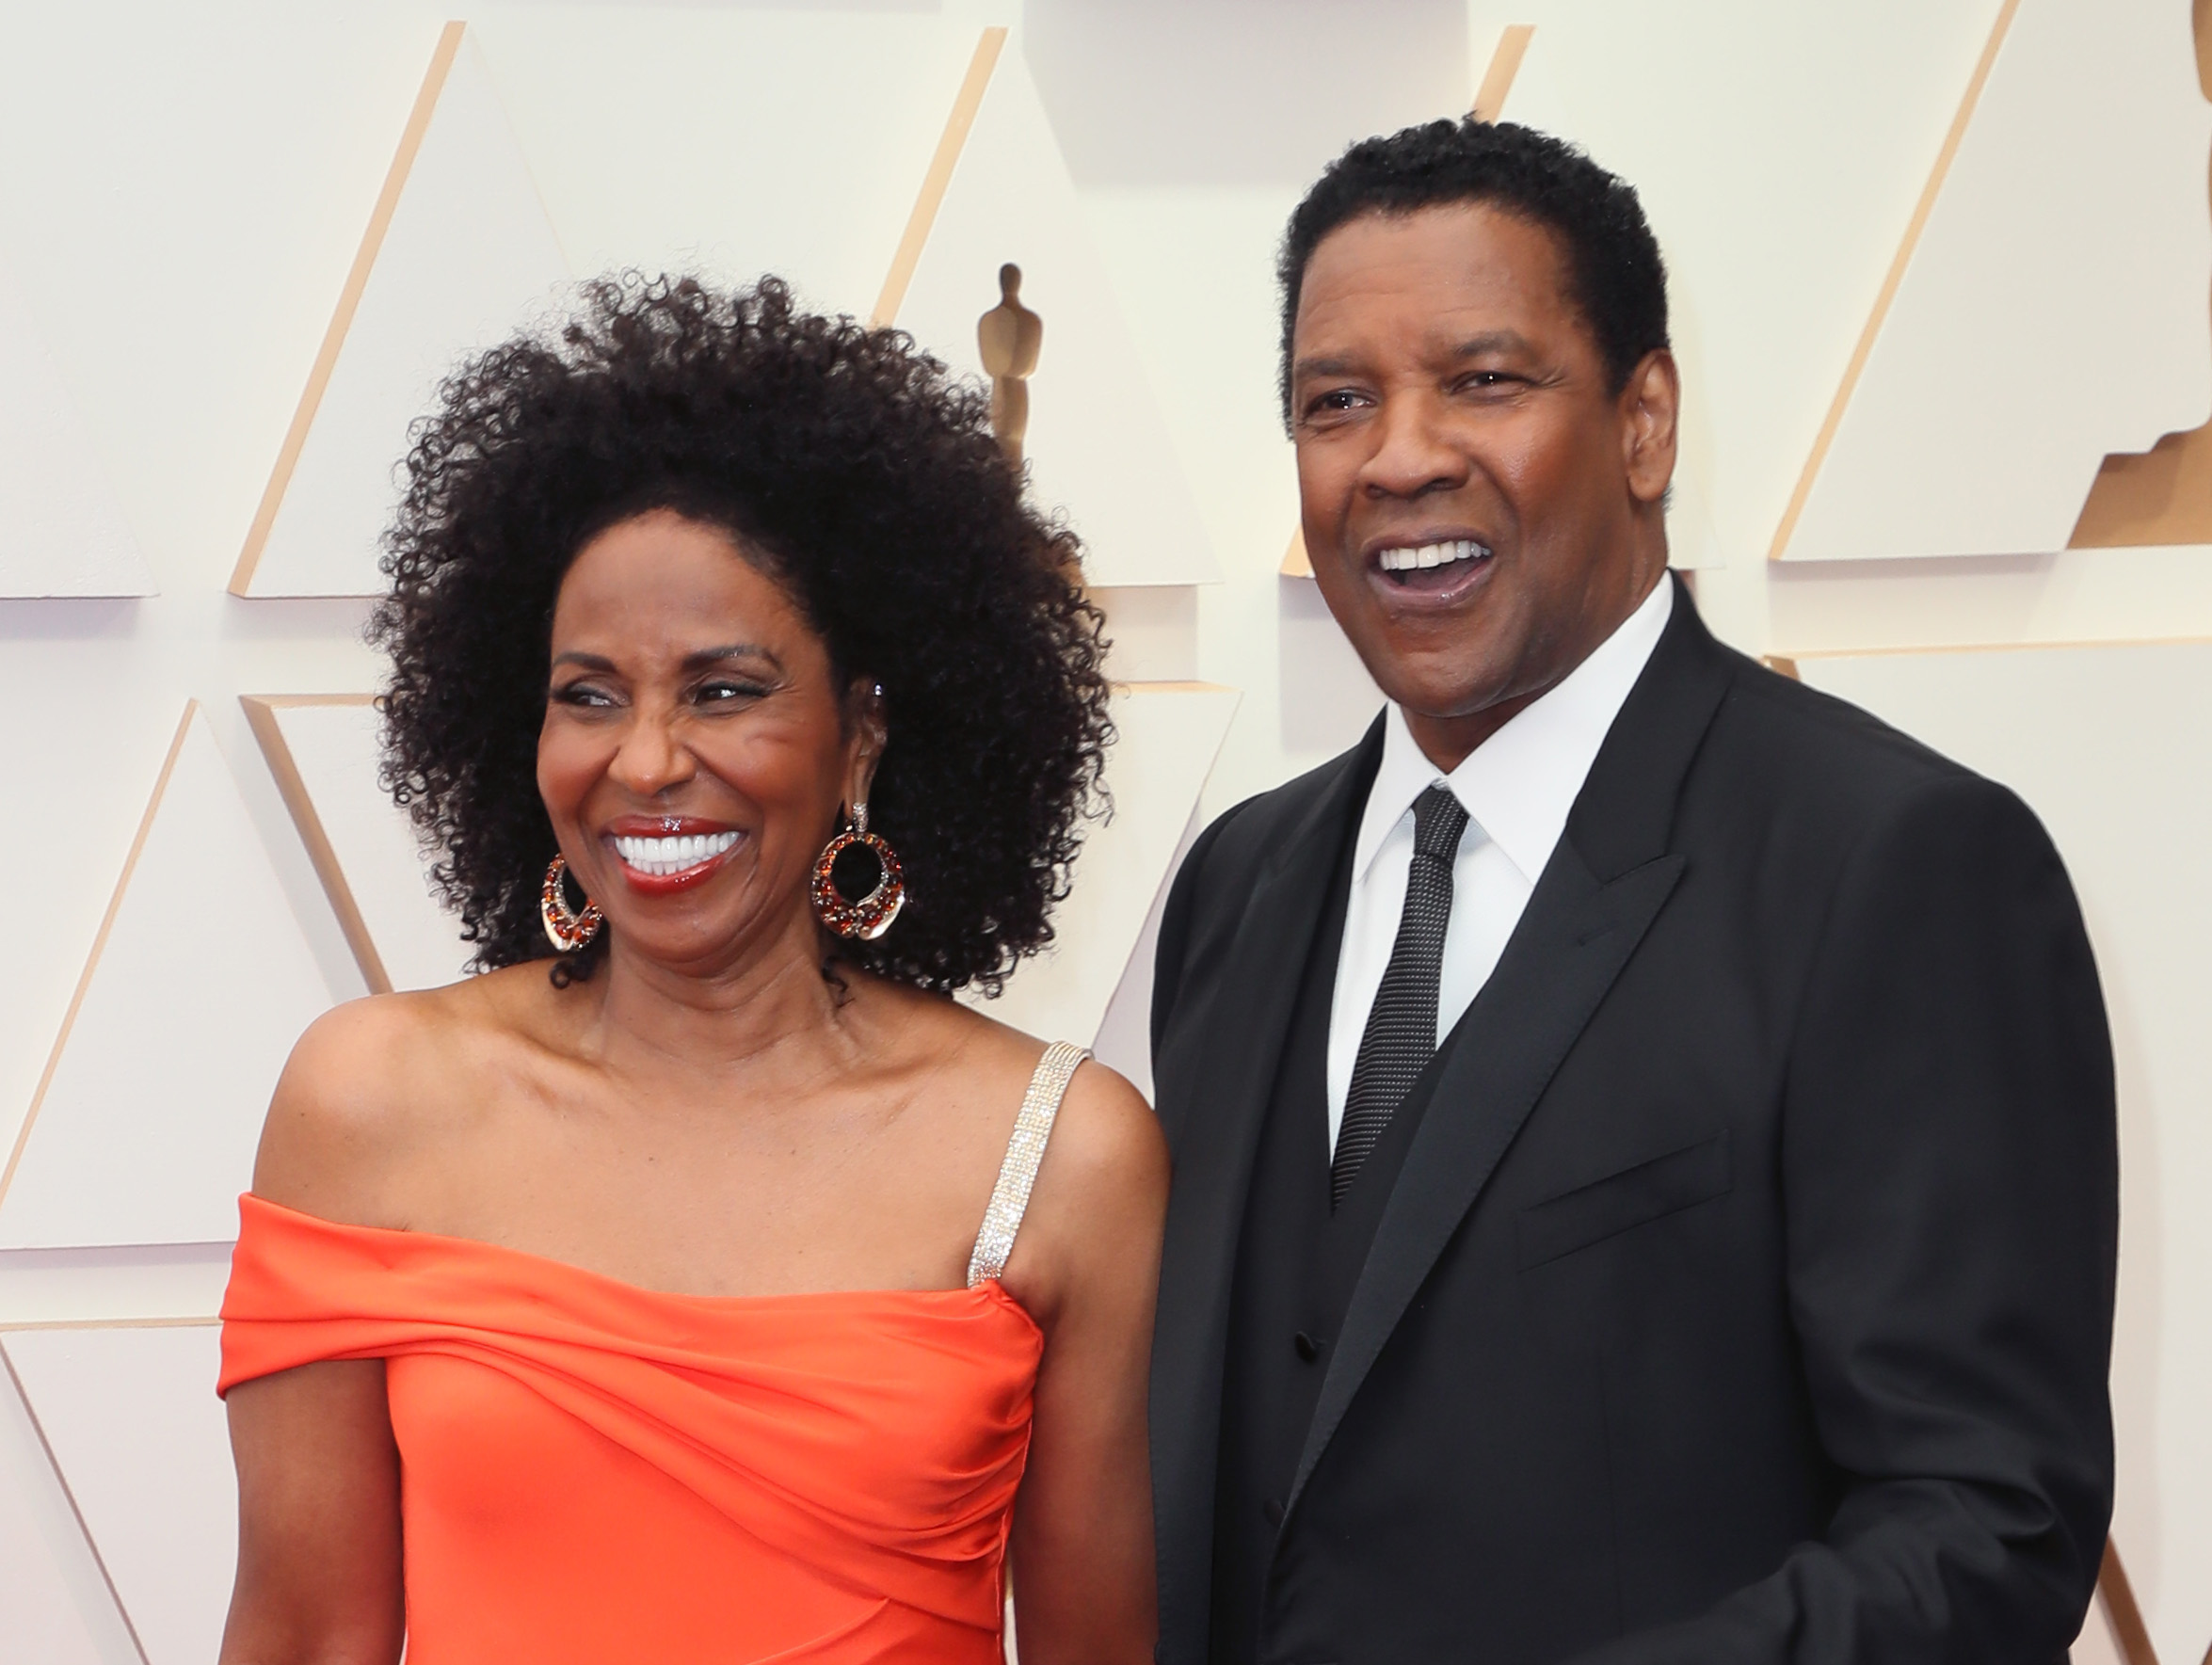 Pauletta Washington and Denzel Washington during the 94th Annual Academy Awards in Hollywood, California on March 27, 2022 | Source: Getty Images